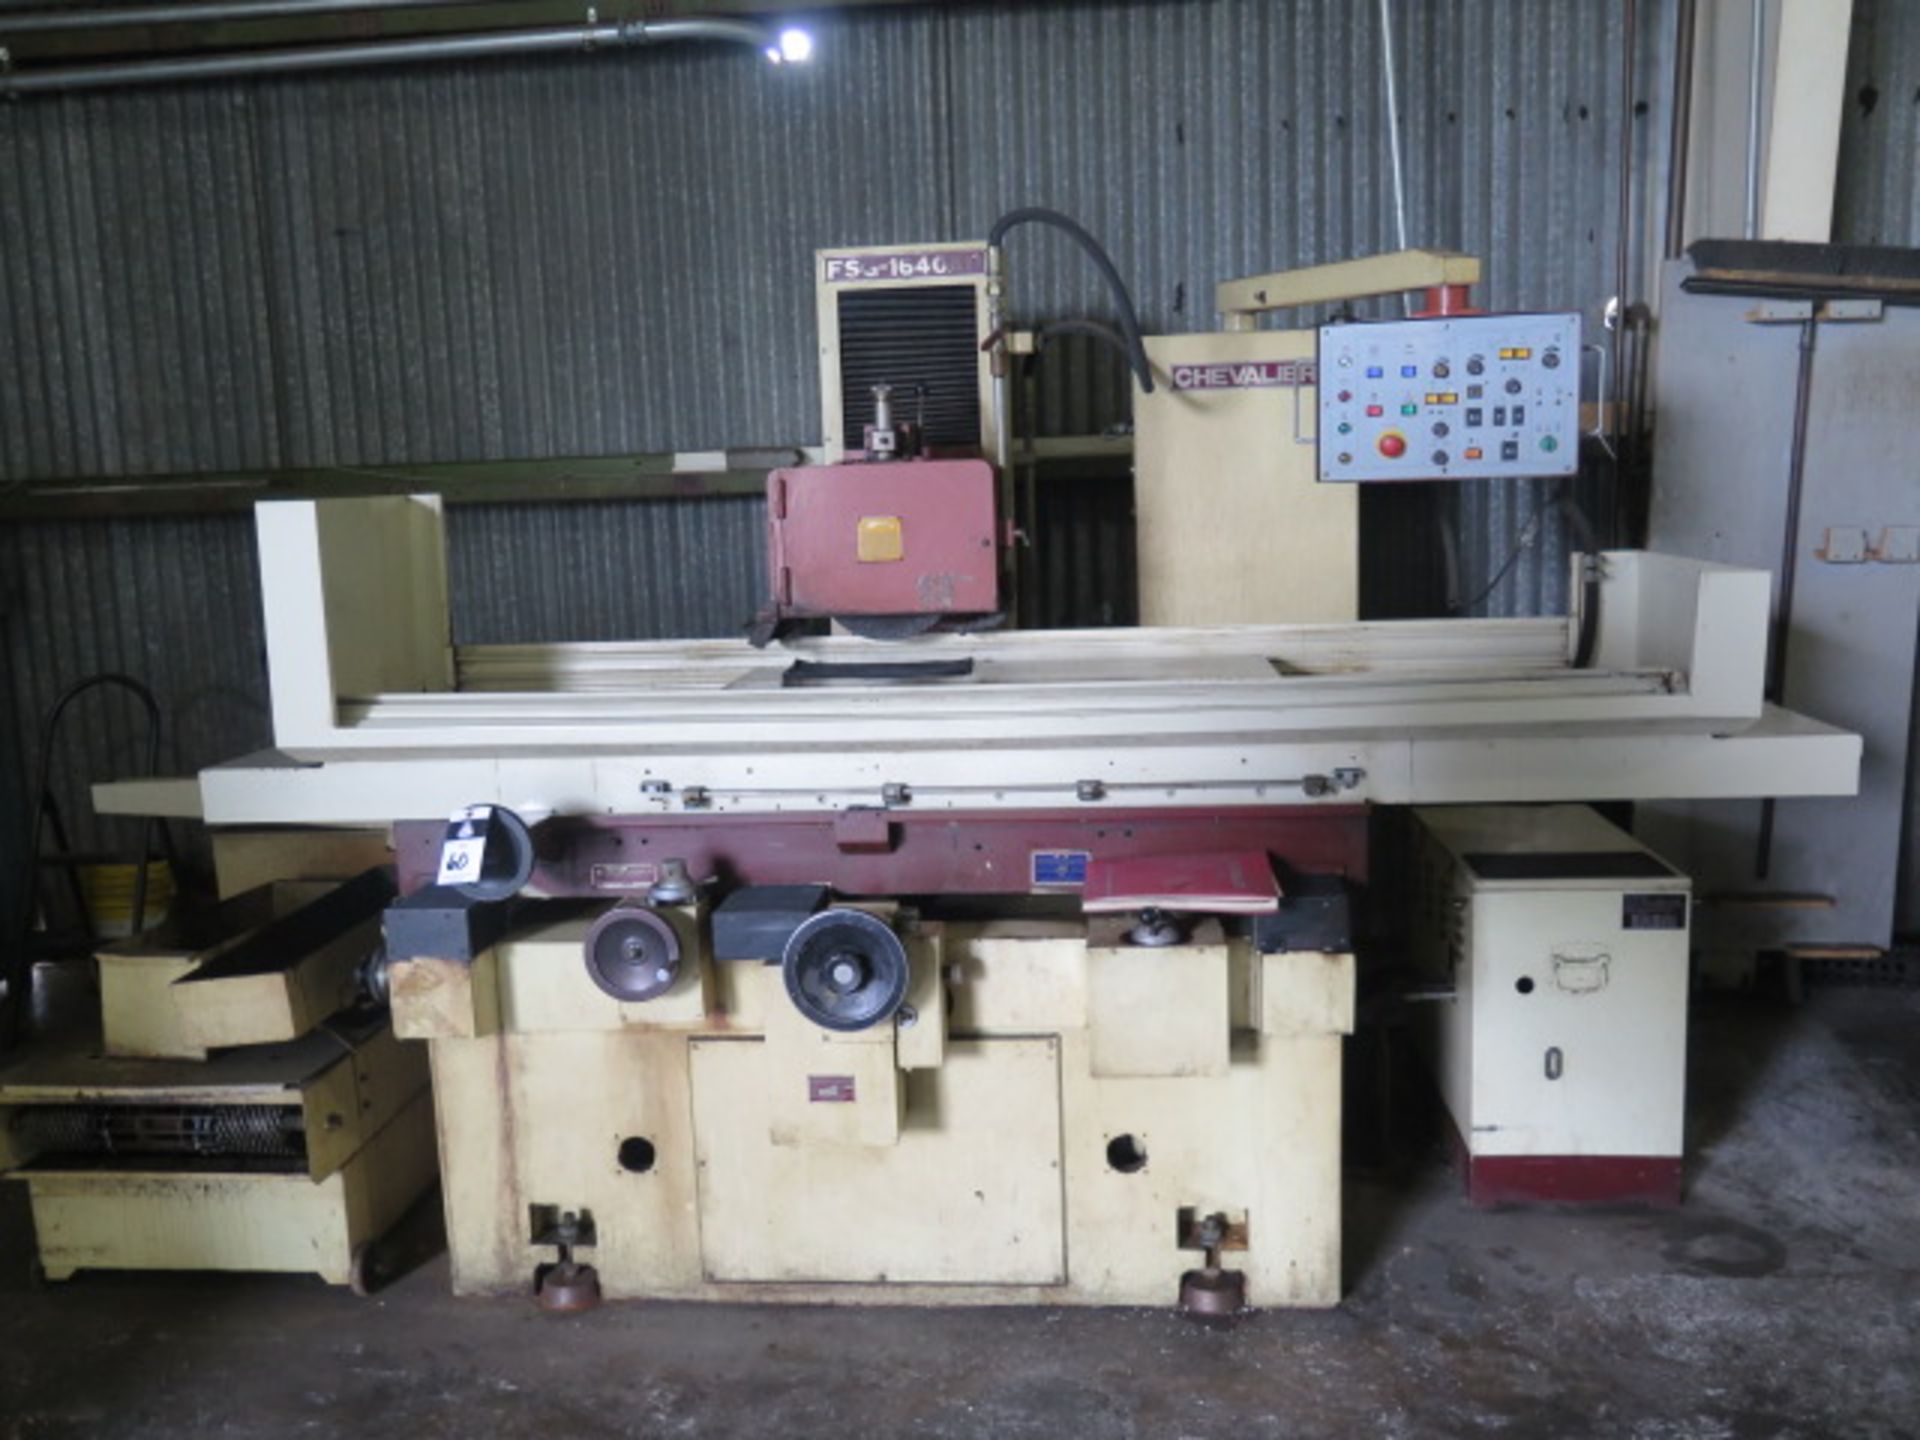 Chevalier FSG-1640AD 16” x 40” Auto Surface Grinder s/n G478004 w/ Chevalier Controls, SOLD AS IS